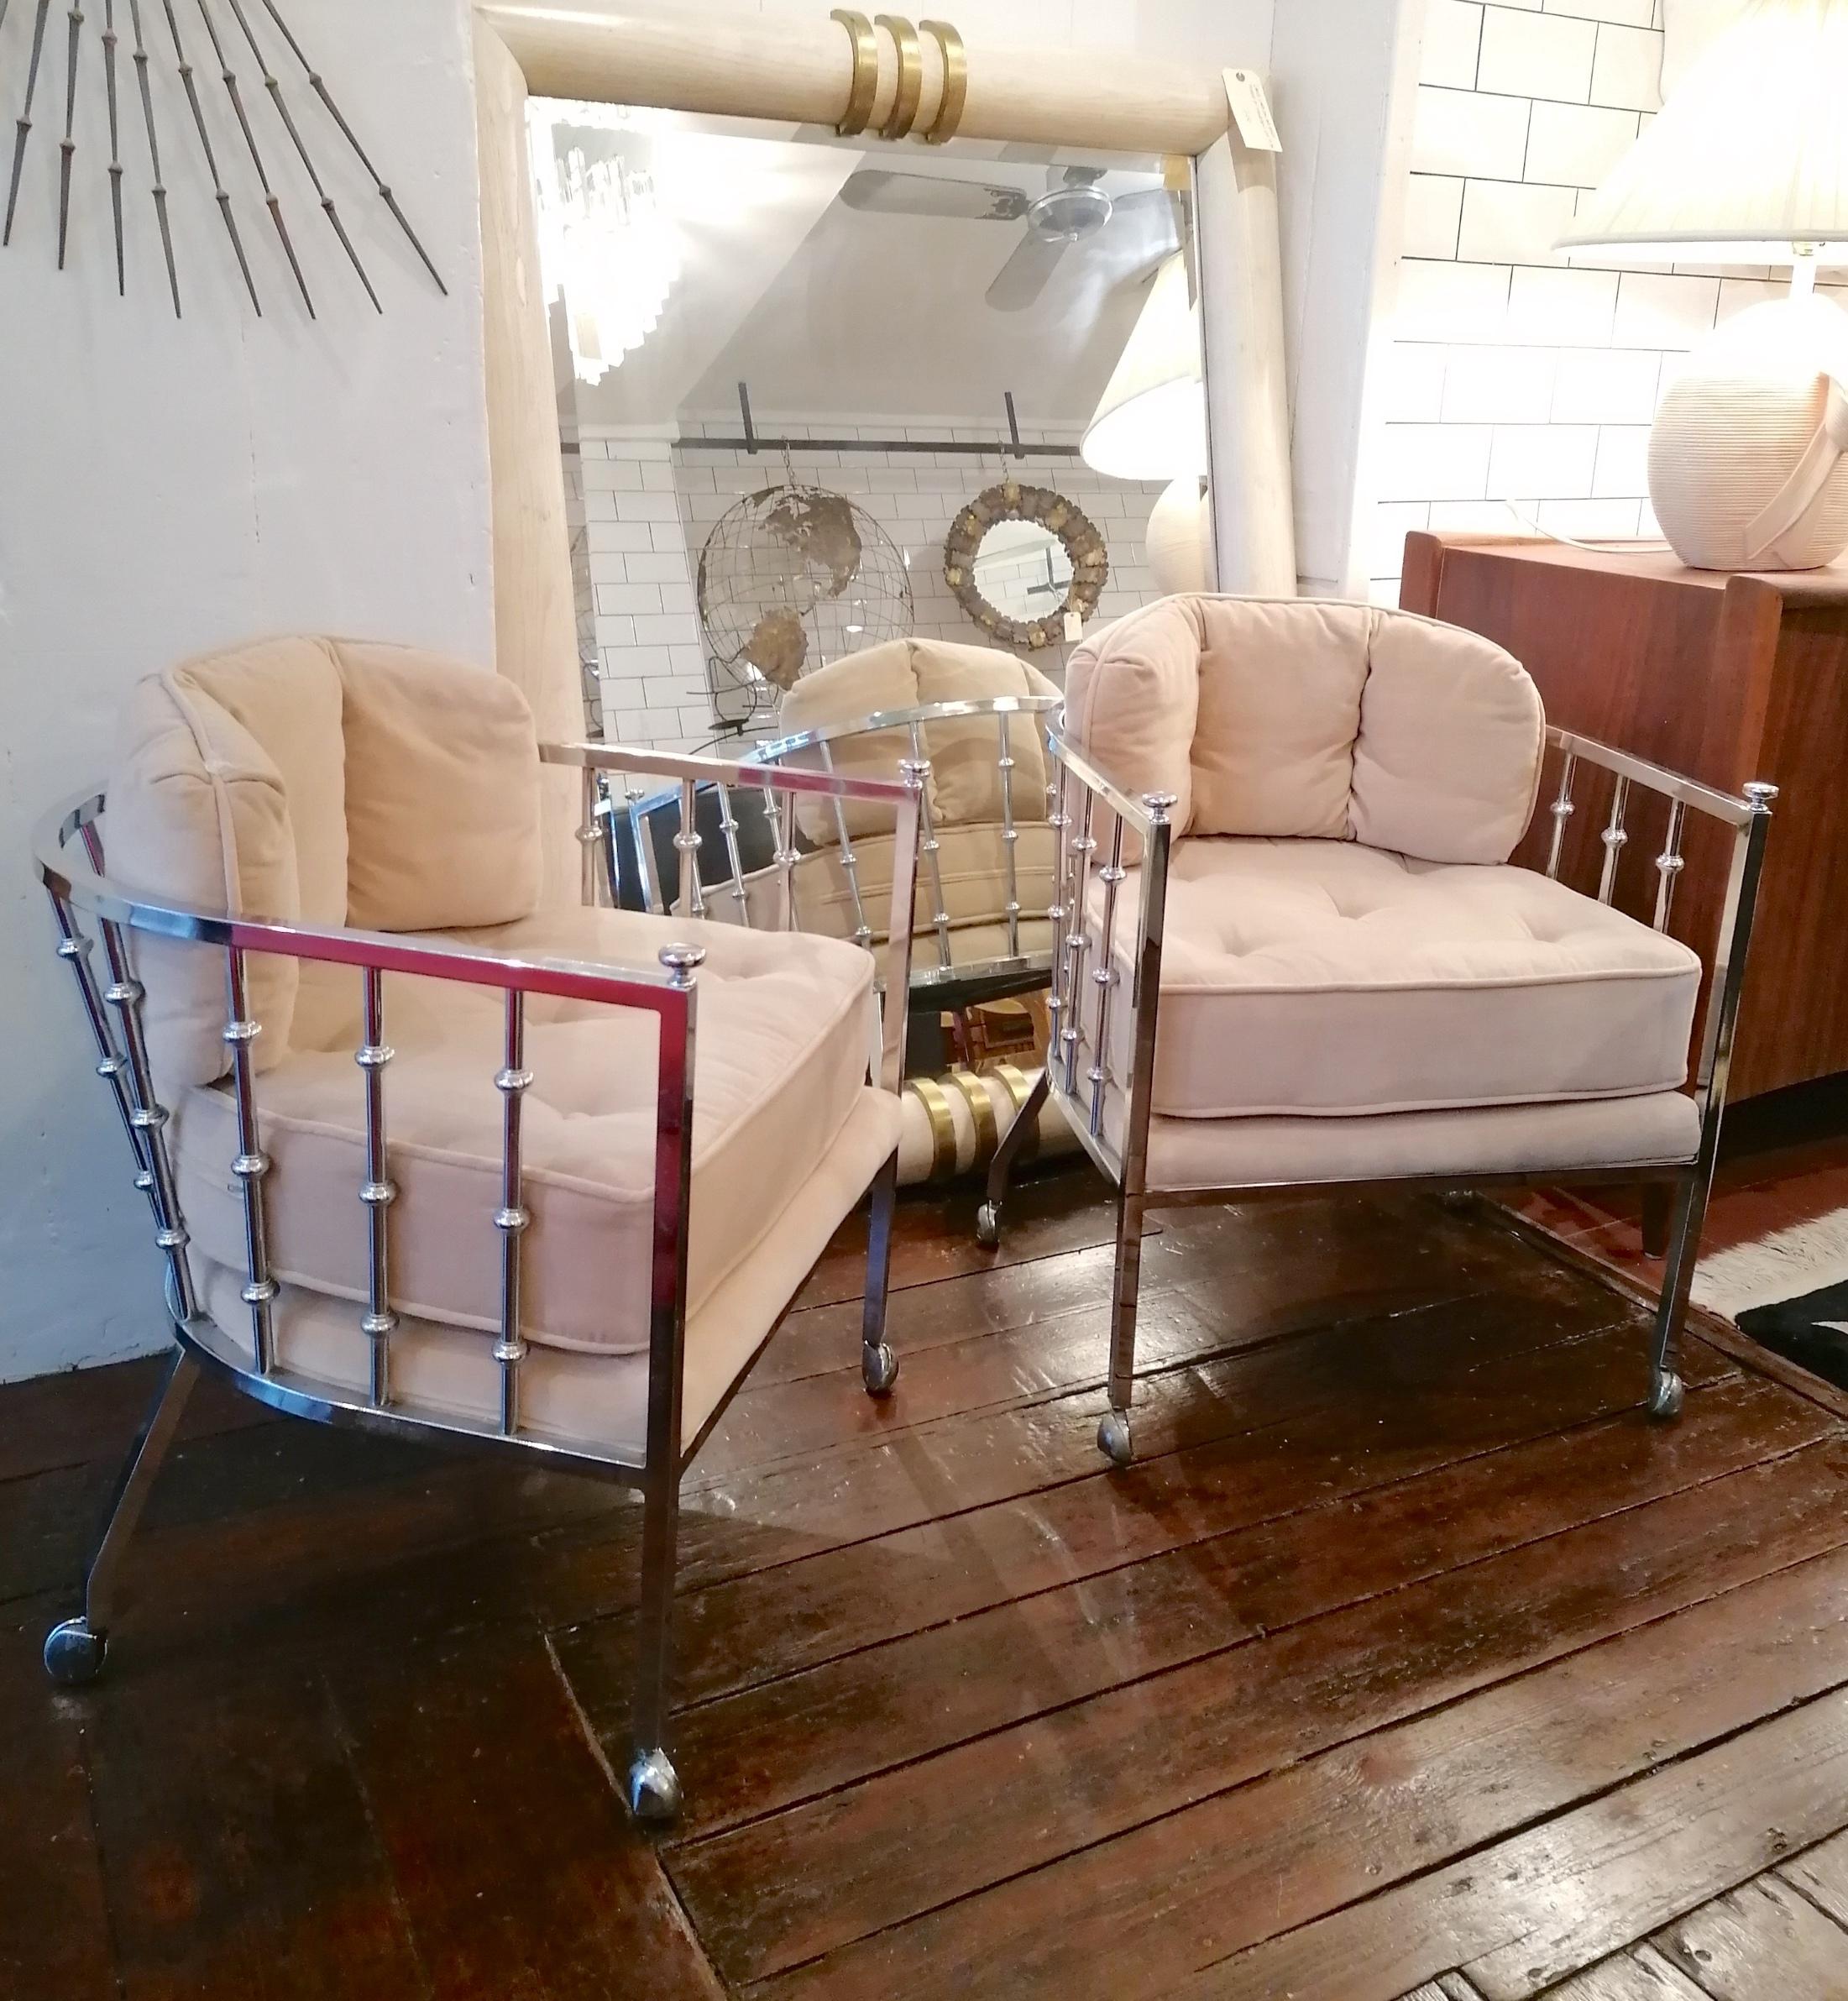 Unusual chrome spindle armchairs with casters, by Drexel, USA, 1970s: two available.
The original velvet upholstery is a very subtle blush colour. Newly re-webbed. Selling chairs individually separately.

Dimensions: width 61cm, depth 64cm, height